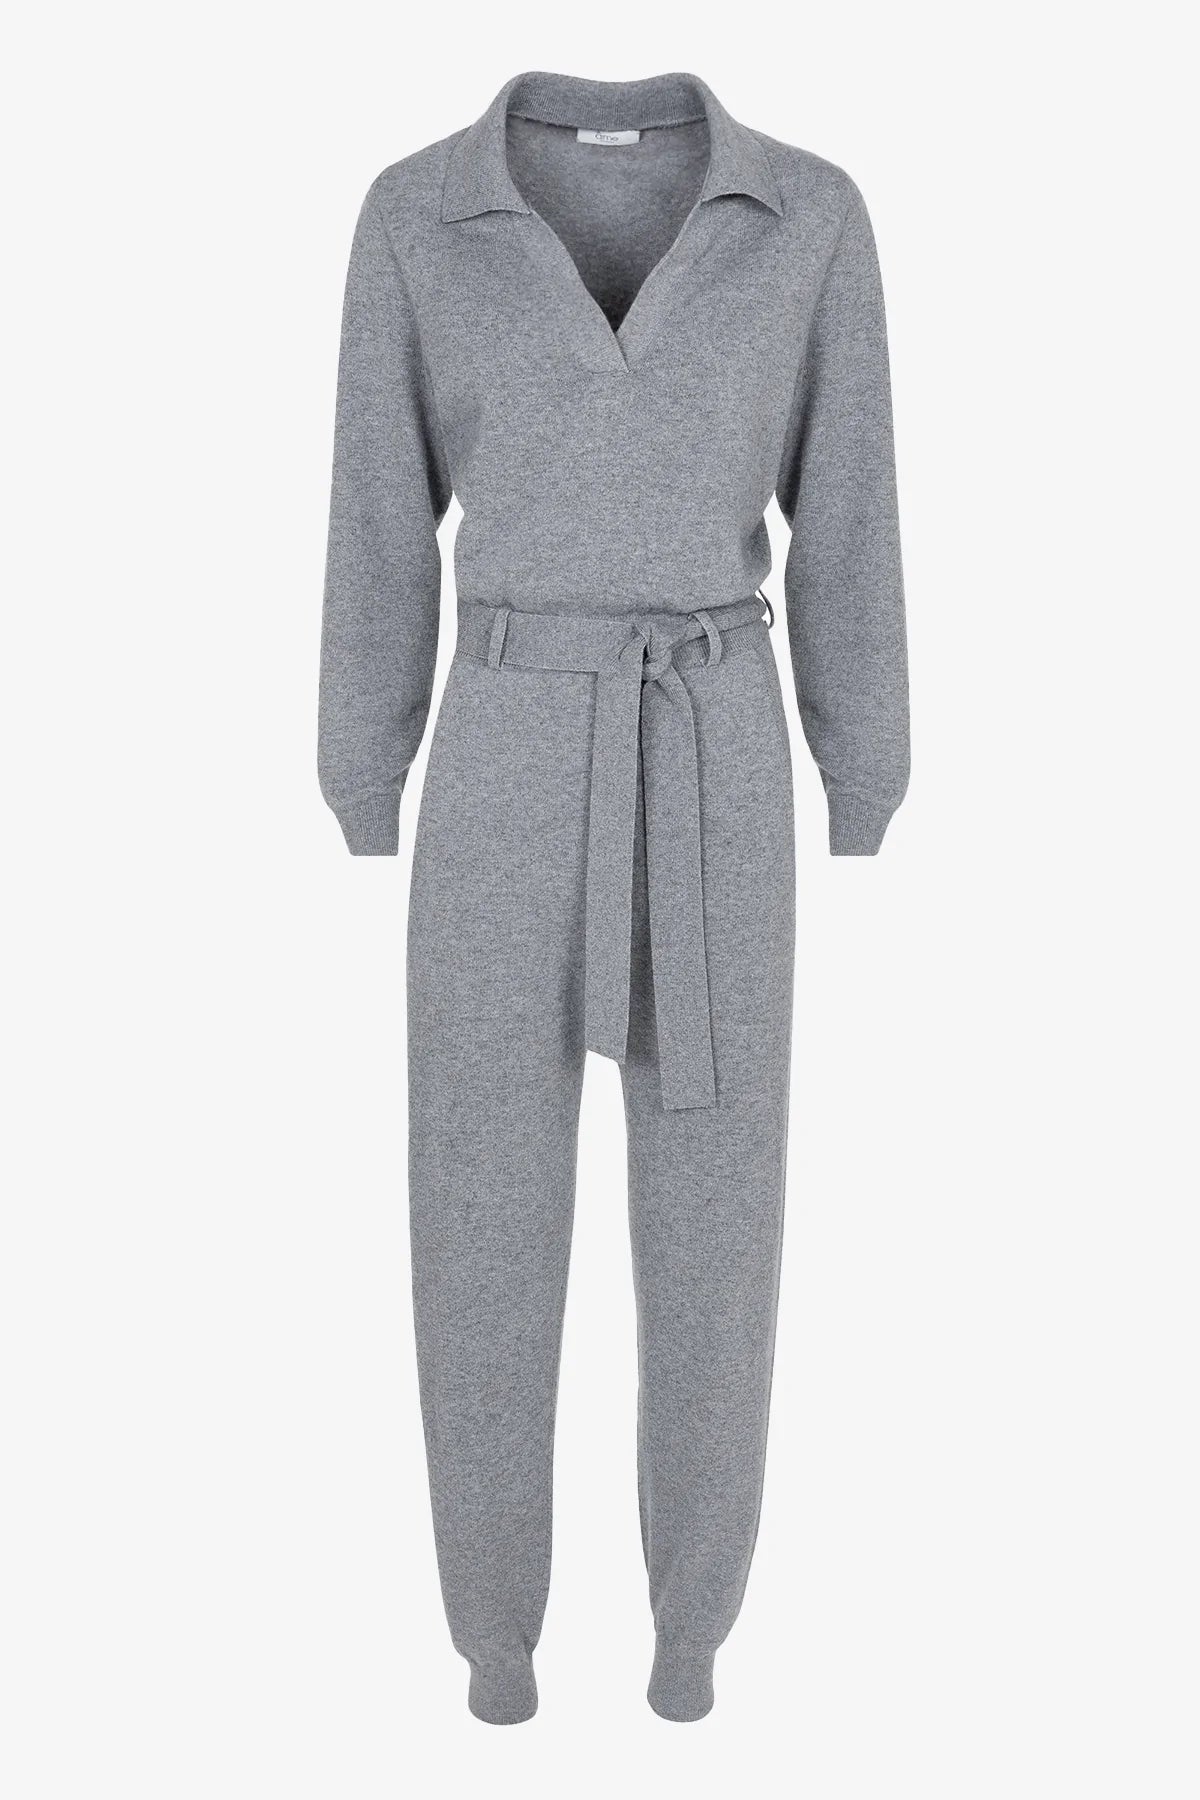 GIANNA KNITTED JUMPSUIT | MARLED GREY FROM AME ANTWERP